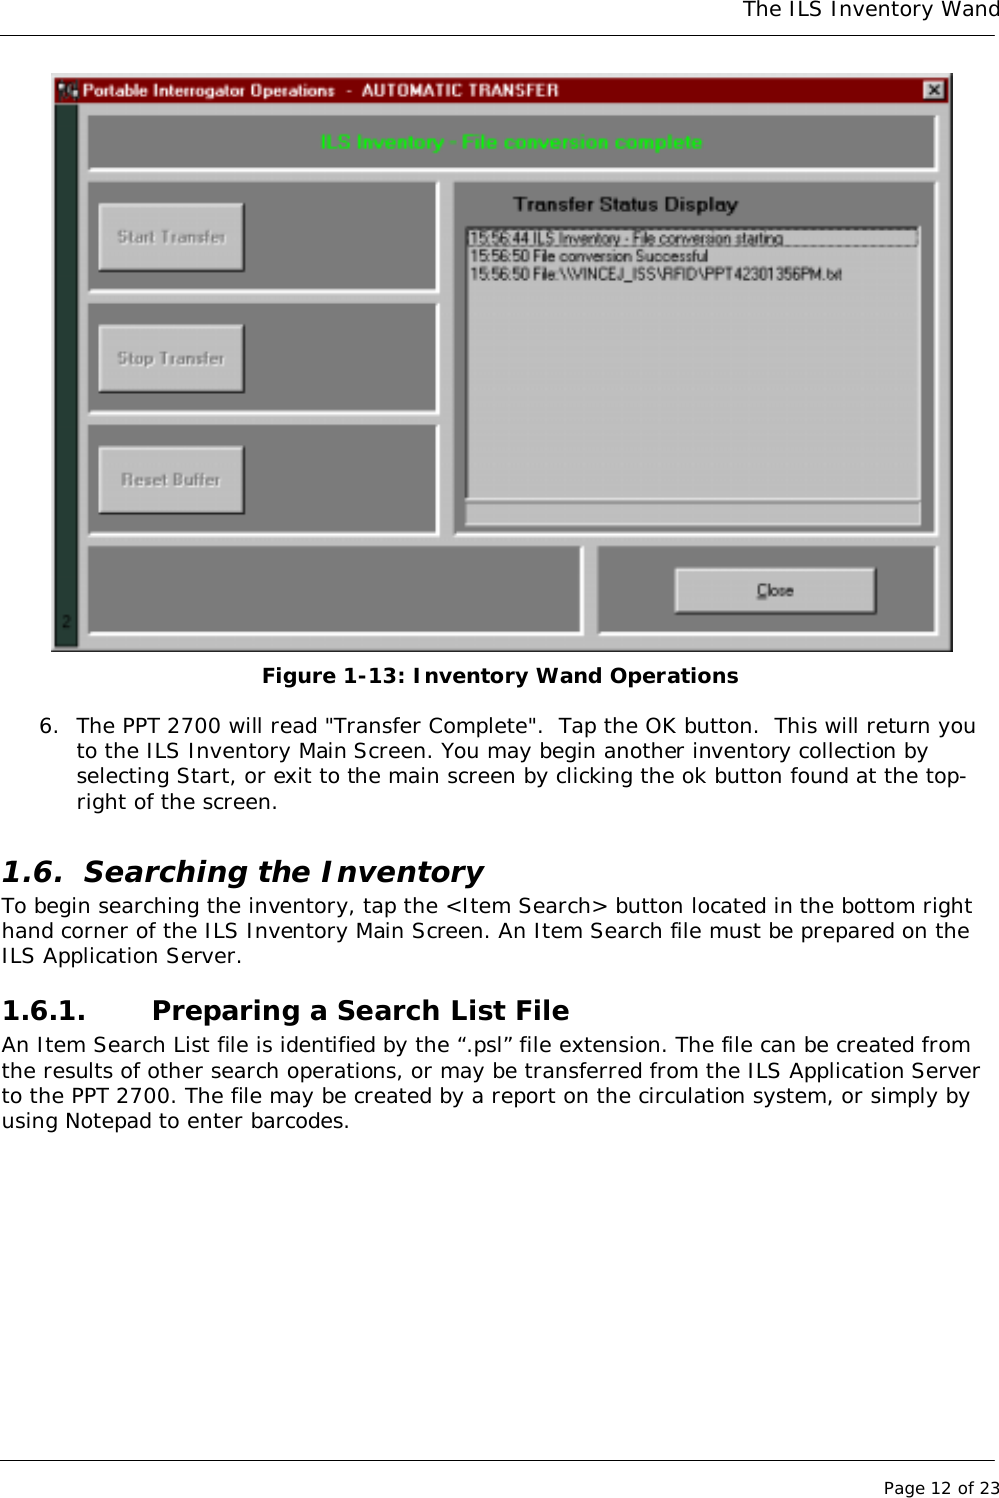 The ILS Inventory WandPage 12 of 23Figure 1-13: Inventory Wand Operations6. The PPT 2700 will read &quot;Transfer Complete&quot;.  Tap the OK button.  This will return youto the ILS Inventory Main Screen. You may begin another inventory collection byselecting Start, or exit to the main screen by clicking the ok button found at the top-right of the screen.1.6. Searching the InventoryTo begin searching the inventory, tap the &lt;Item Search&gt; button located in the bottom righthand corner of the ILS Inventory Main Screen. An Item Search file must be prepared on theILS Application Server.1.6.1. Preparing a Search List FileAn Item Search List file is identified by the “.psl” file extension. The file can be created fromthe results of other search operations, or may be transferred from the ILS Application Serverto the PPT 2700. The file may be created by a report on the circulation system, or simply byusing Notepad to enter barcodes.